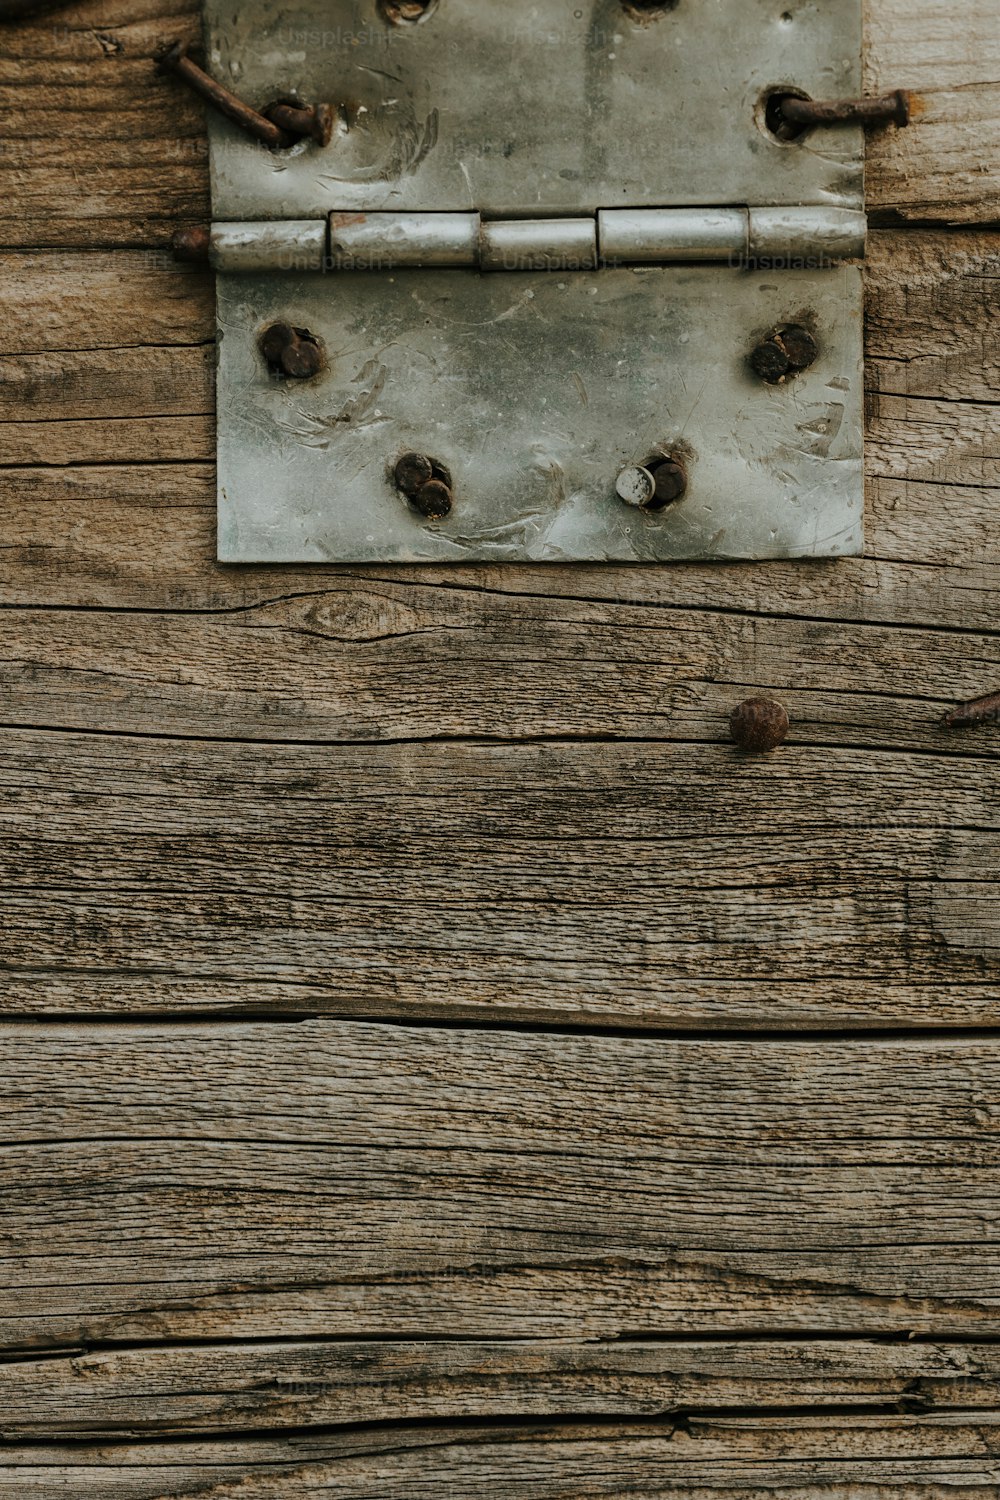 a close up of a metal latch on a wooden door